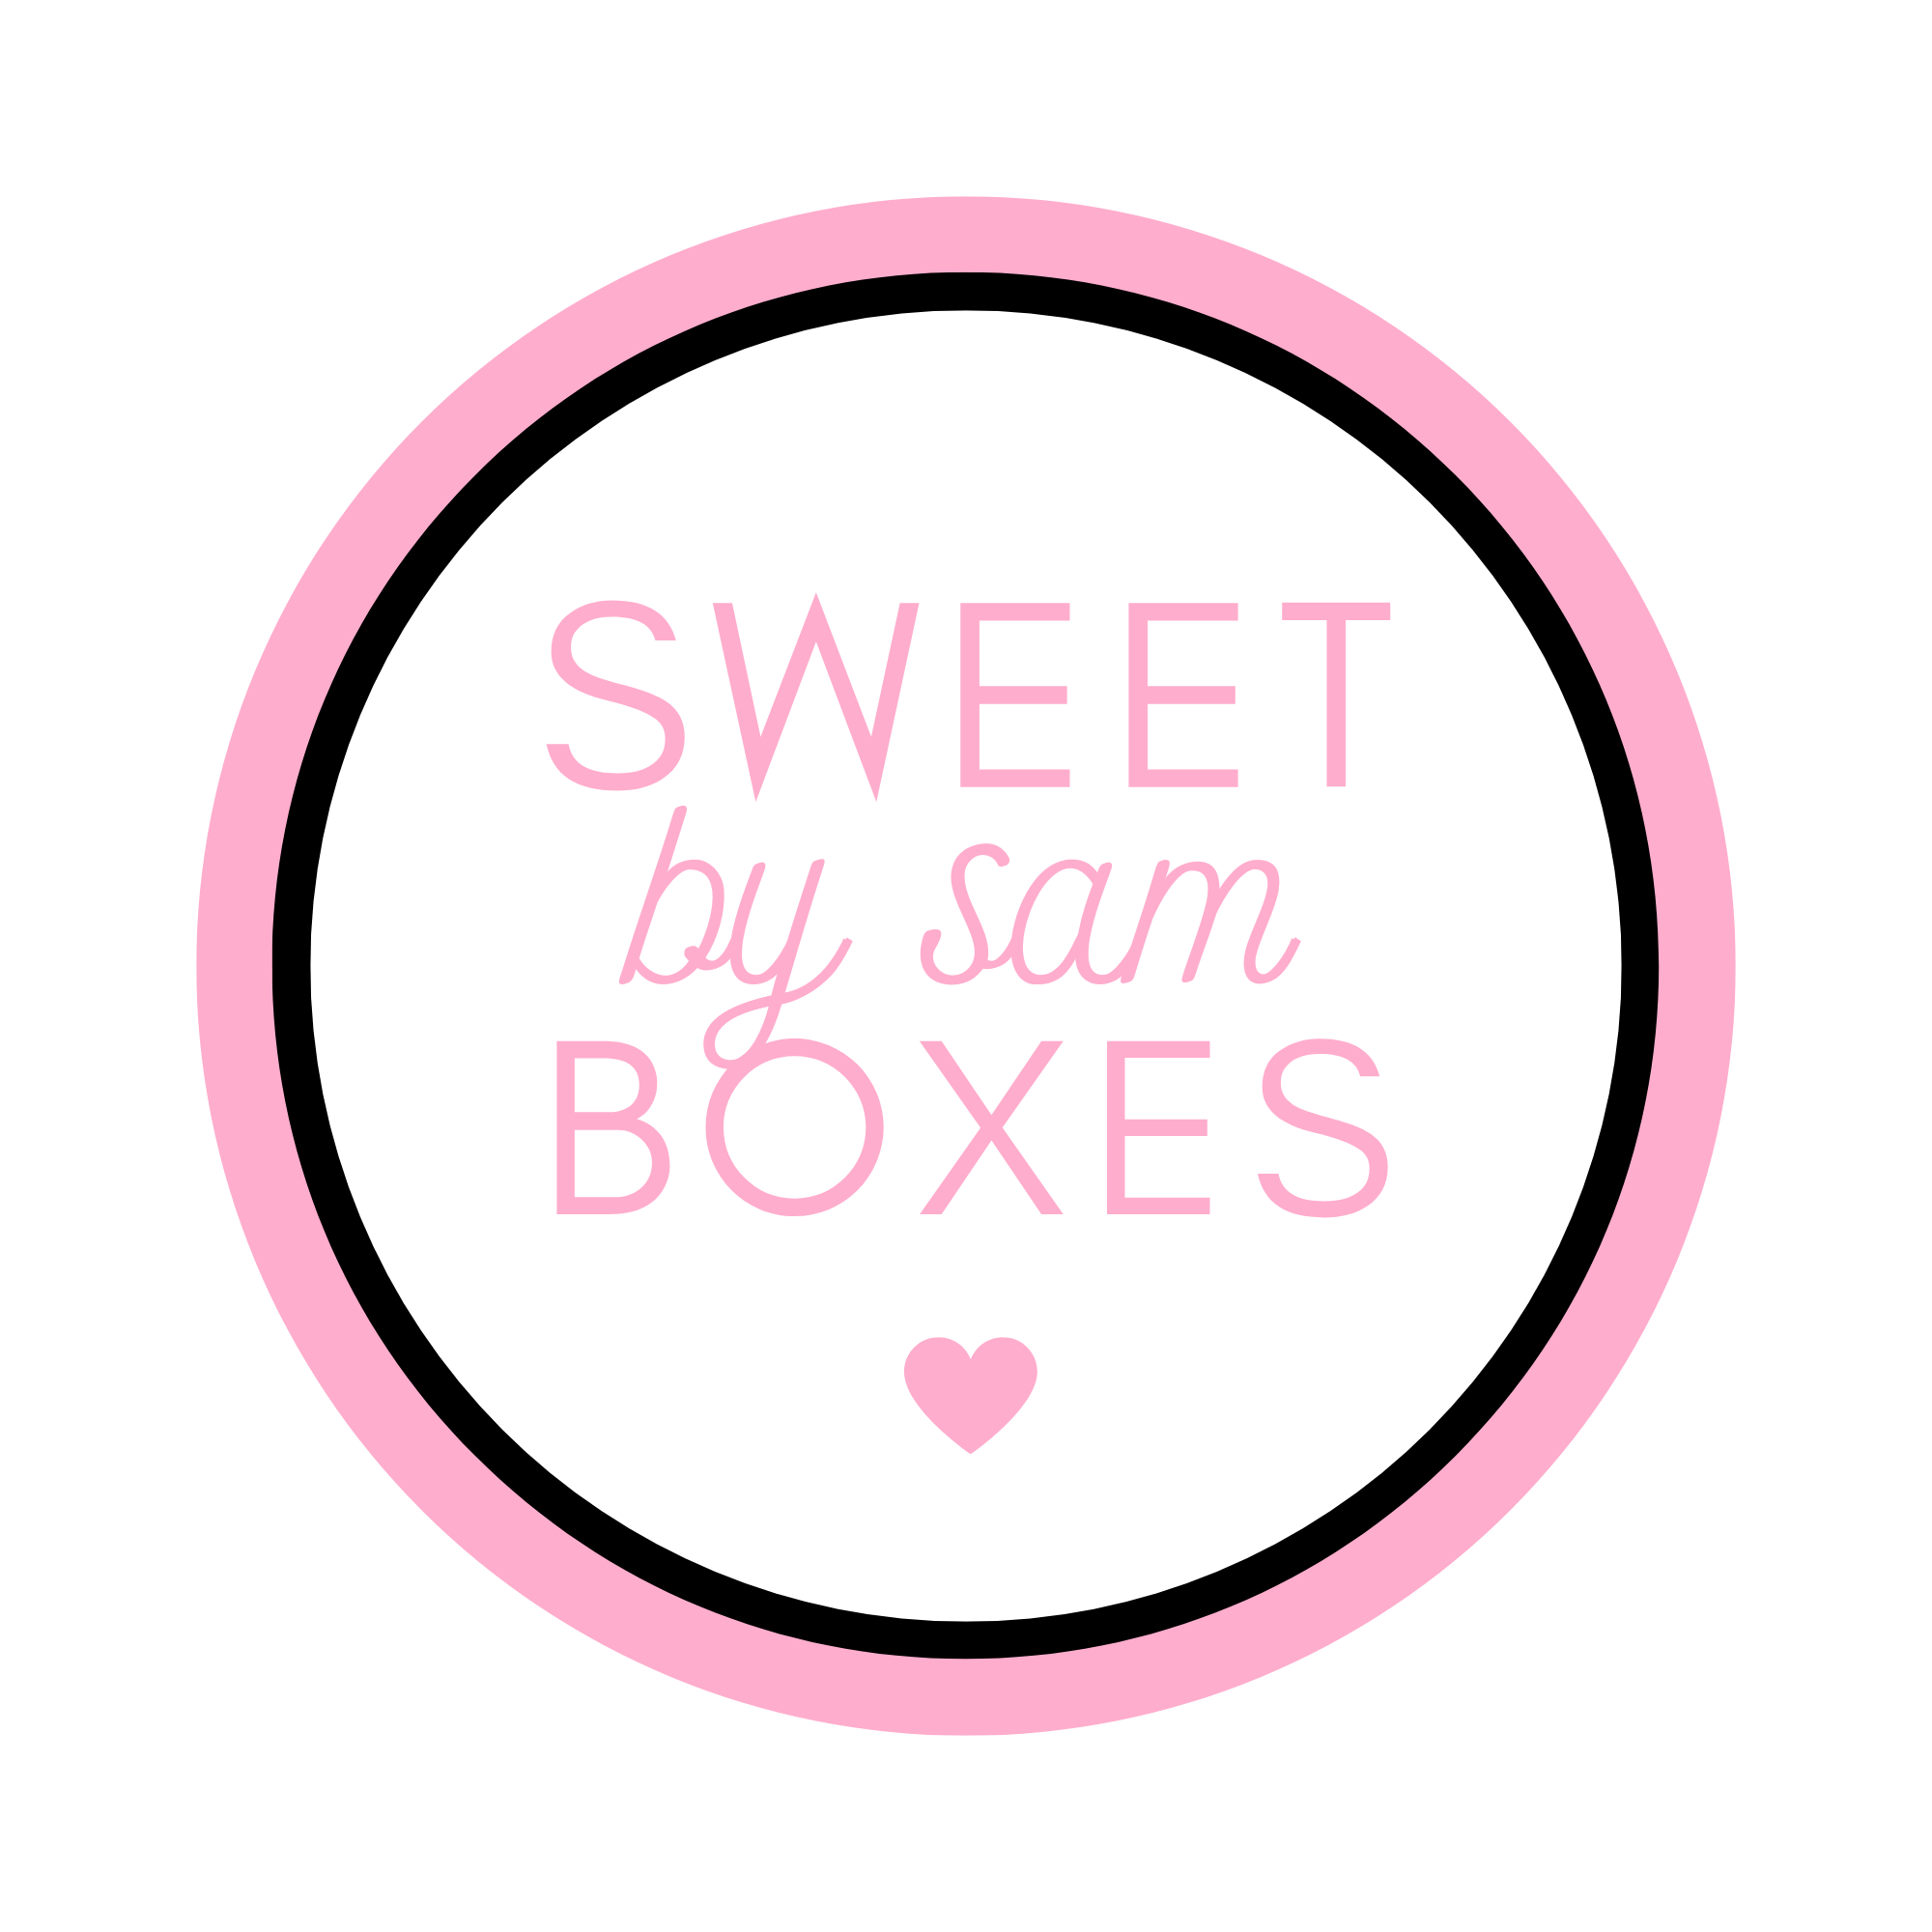 Sweetboxesbysam